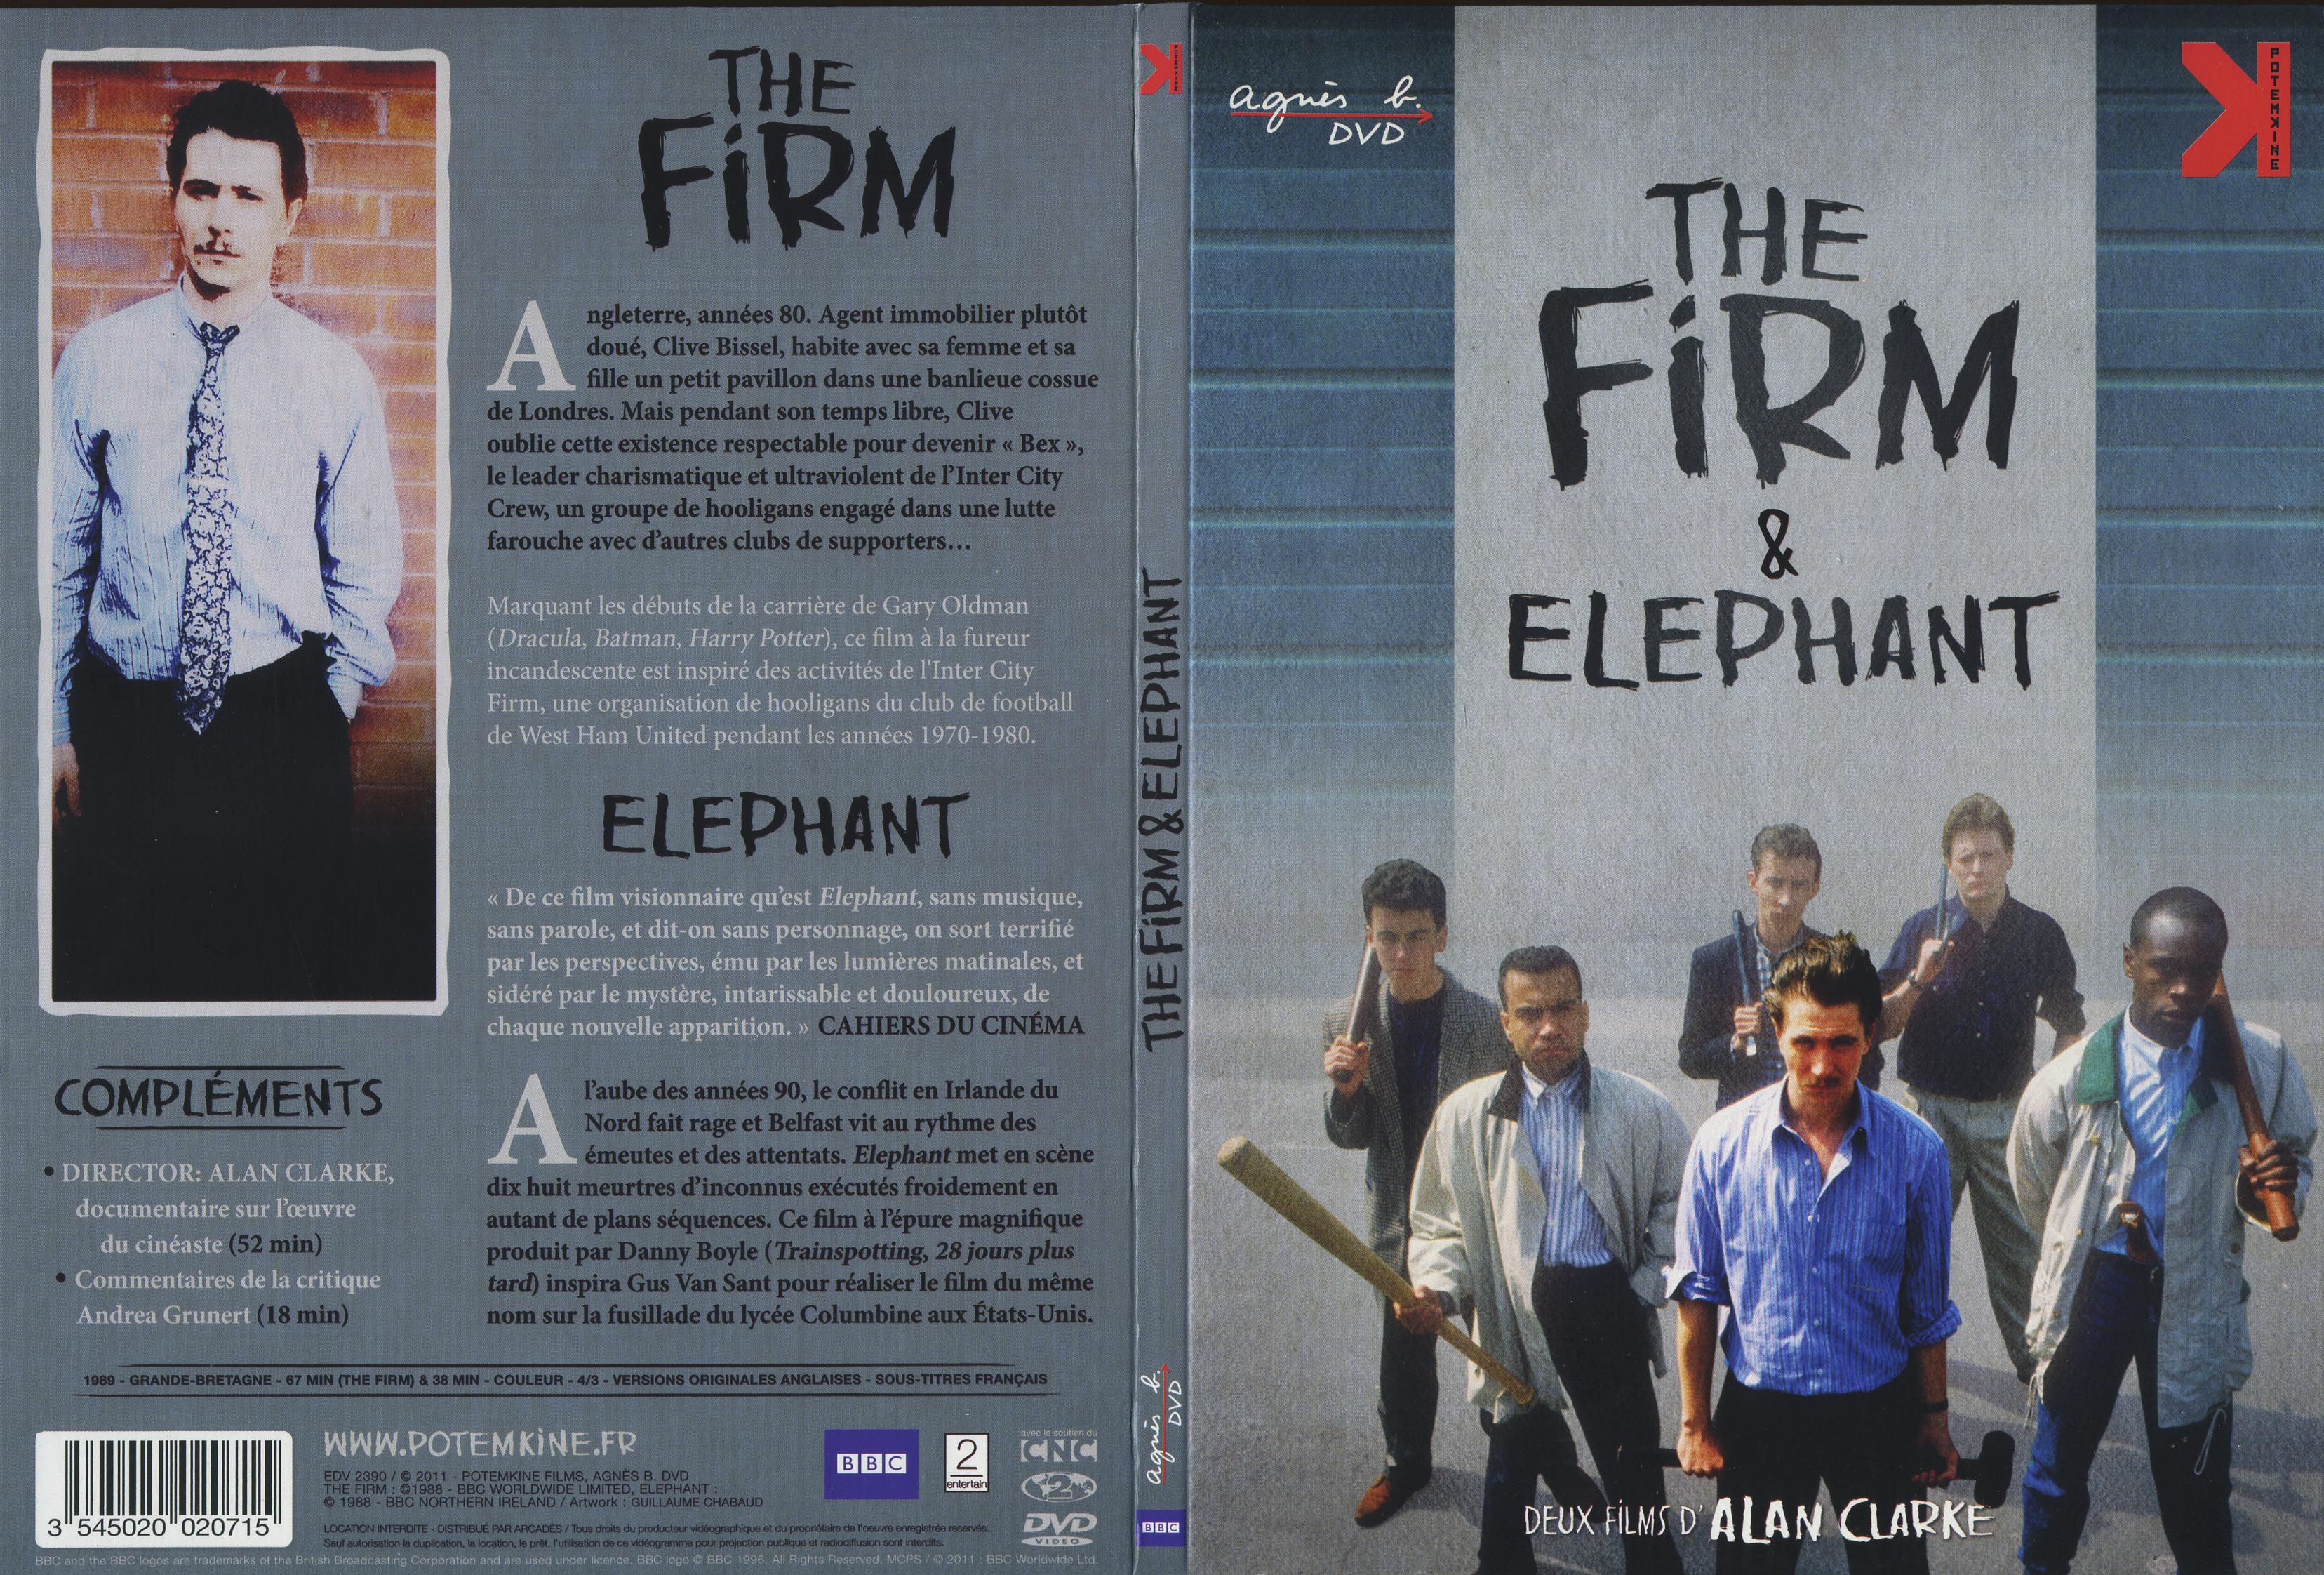 Jaquette DVD The firm and elephant